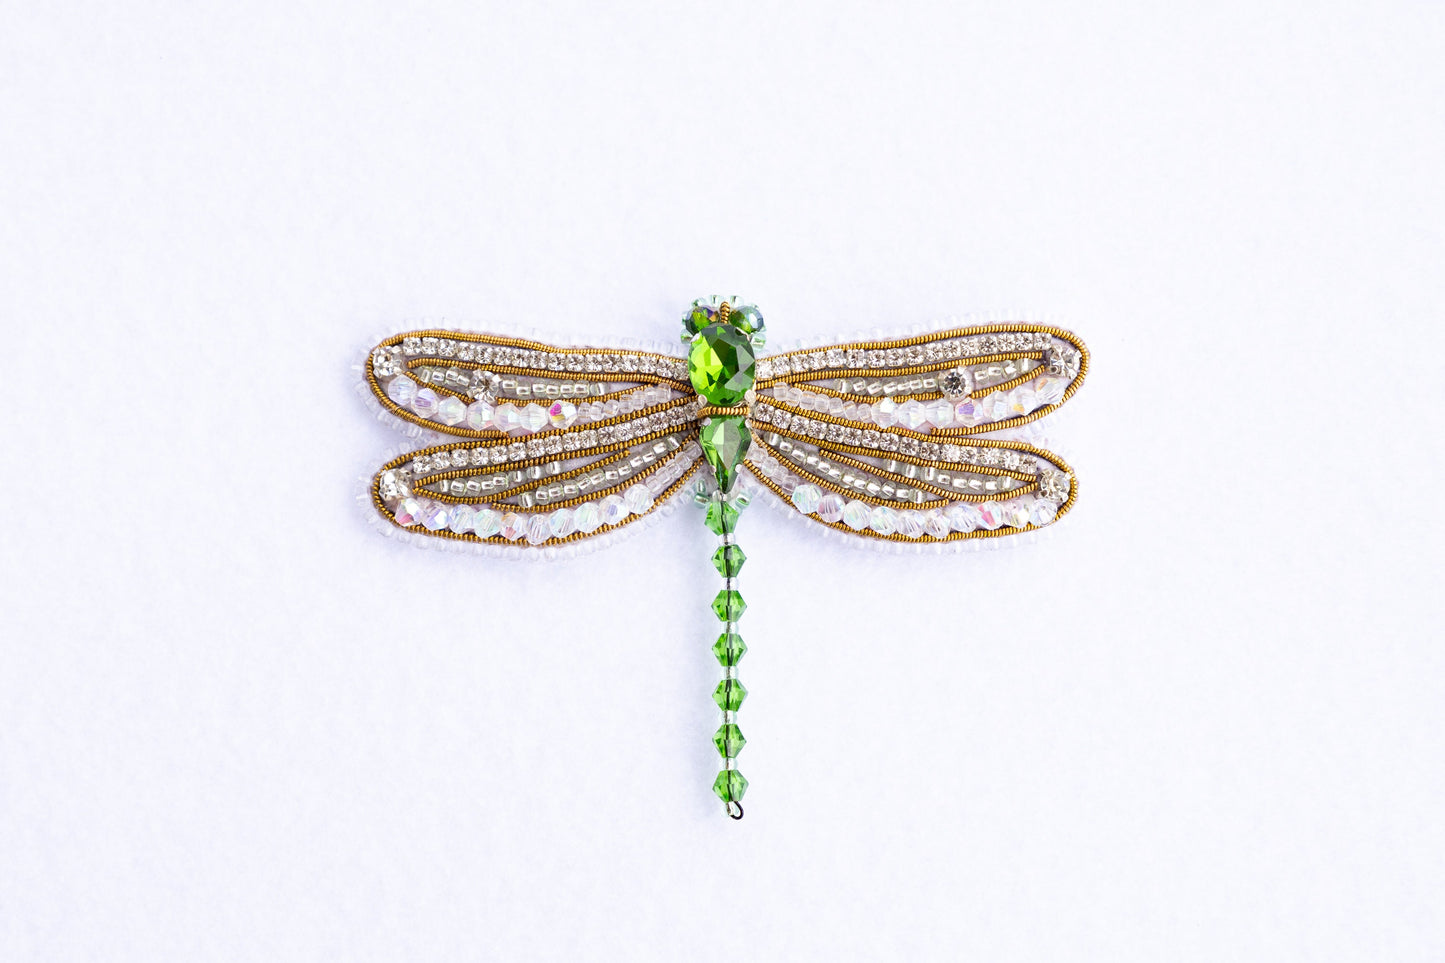 Set of 3 DIY Beaded Brooches Kits, Craft kits, Beaded Dragonflies Brooches, Jewelry Making Kits for Adults, Bead embroidery kits